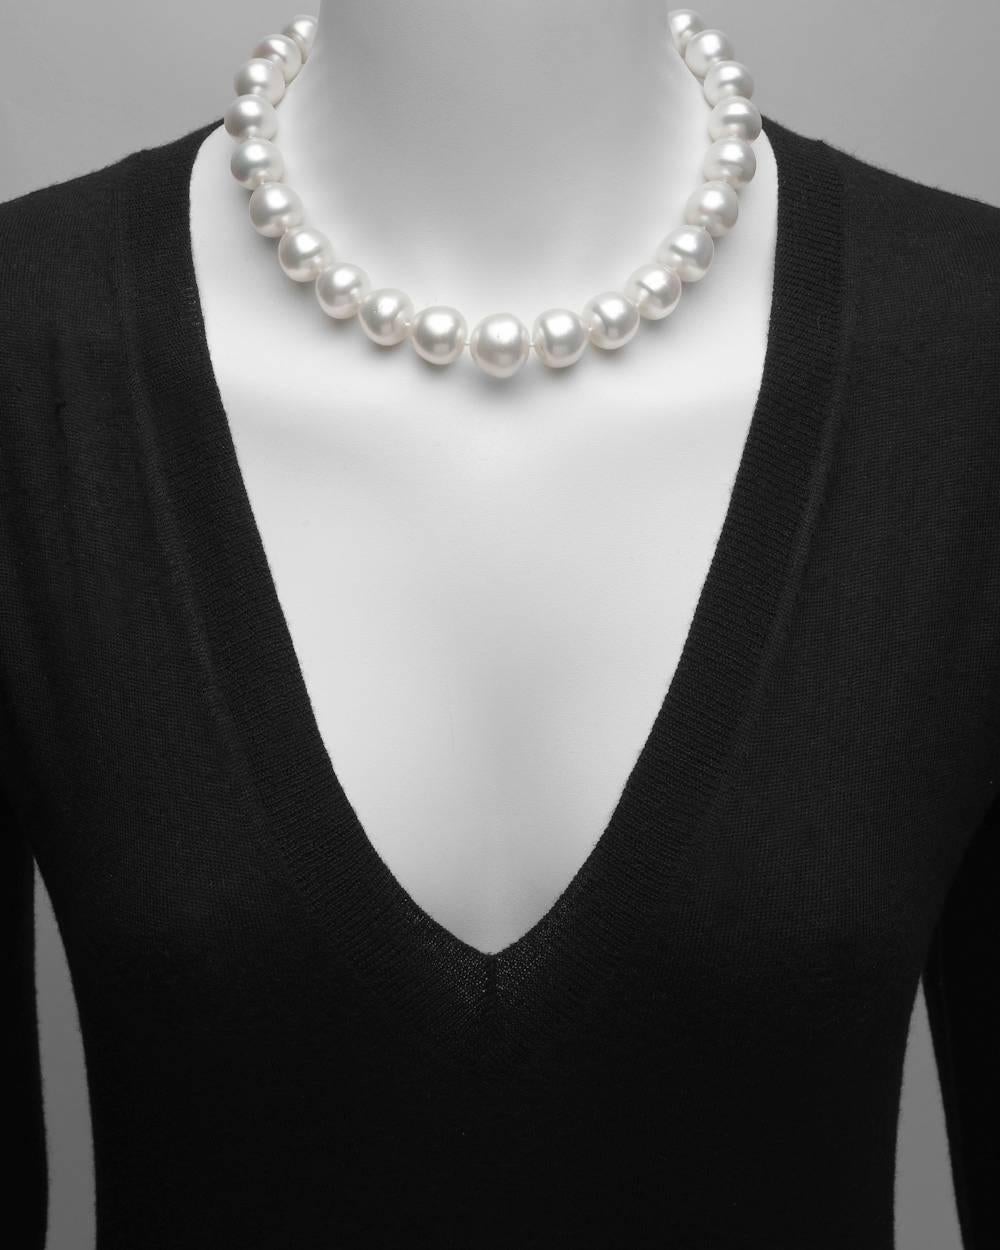 Graduated semi-baroque pearl necklace, composed of 28 cultured pearls measuring approximately 18mm to 13mm in diameter, strung on a hand-knotted silk cord and secured by an 15.5mm engraved 18k white gold clasp, set with forty small full-cut round